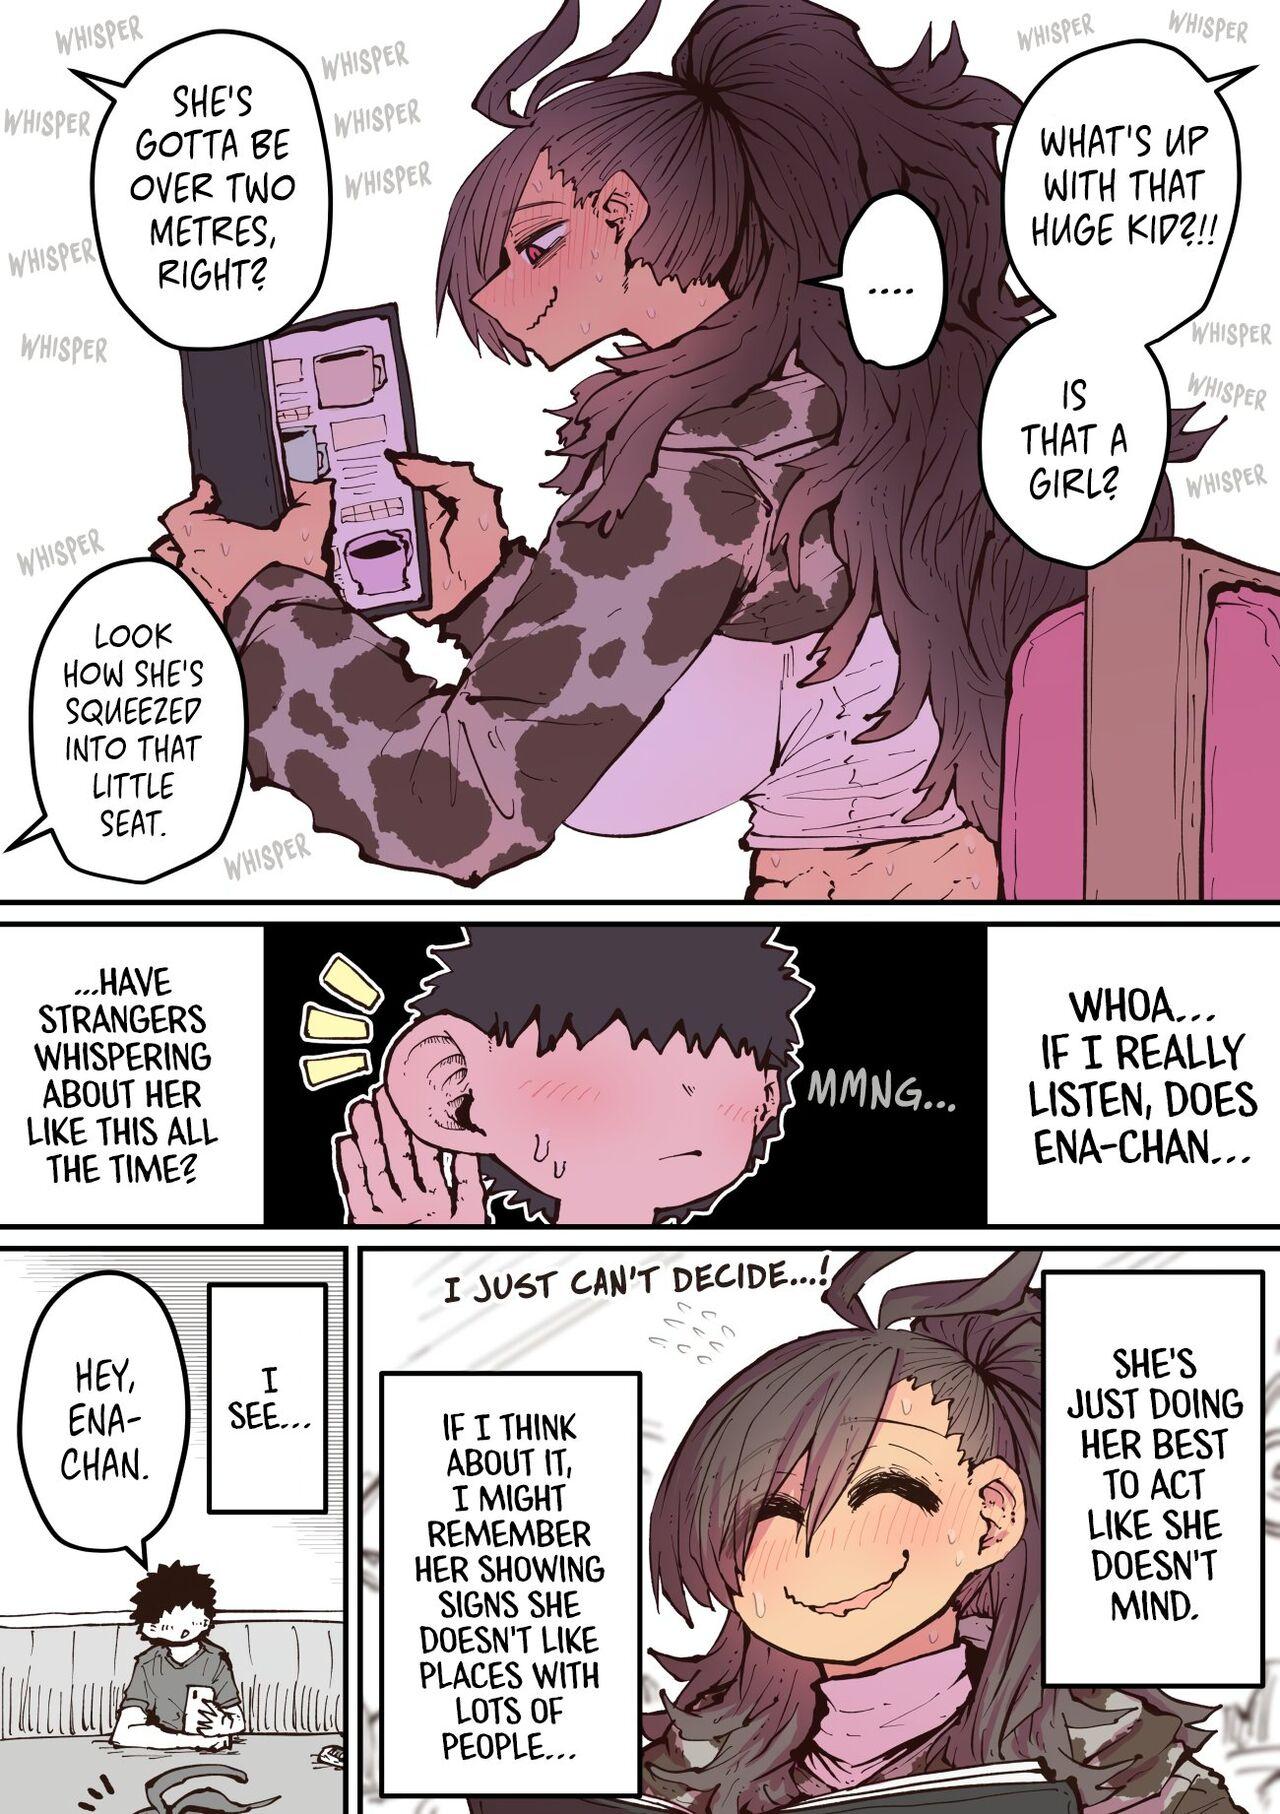 Being Targeted by Hyena-chan 36